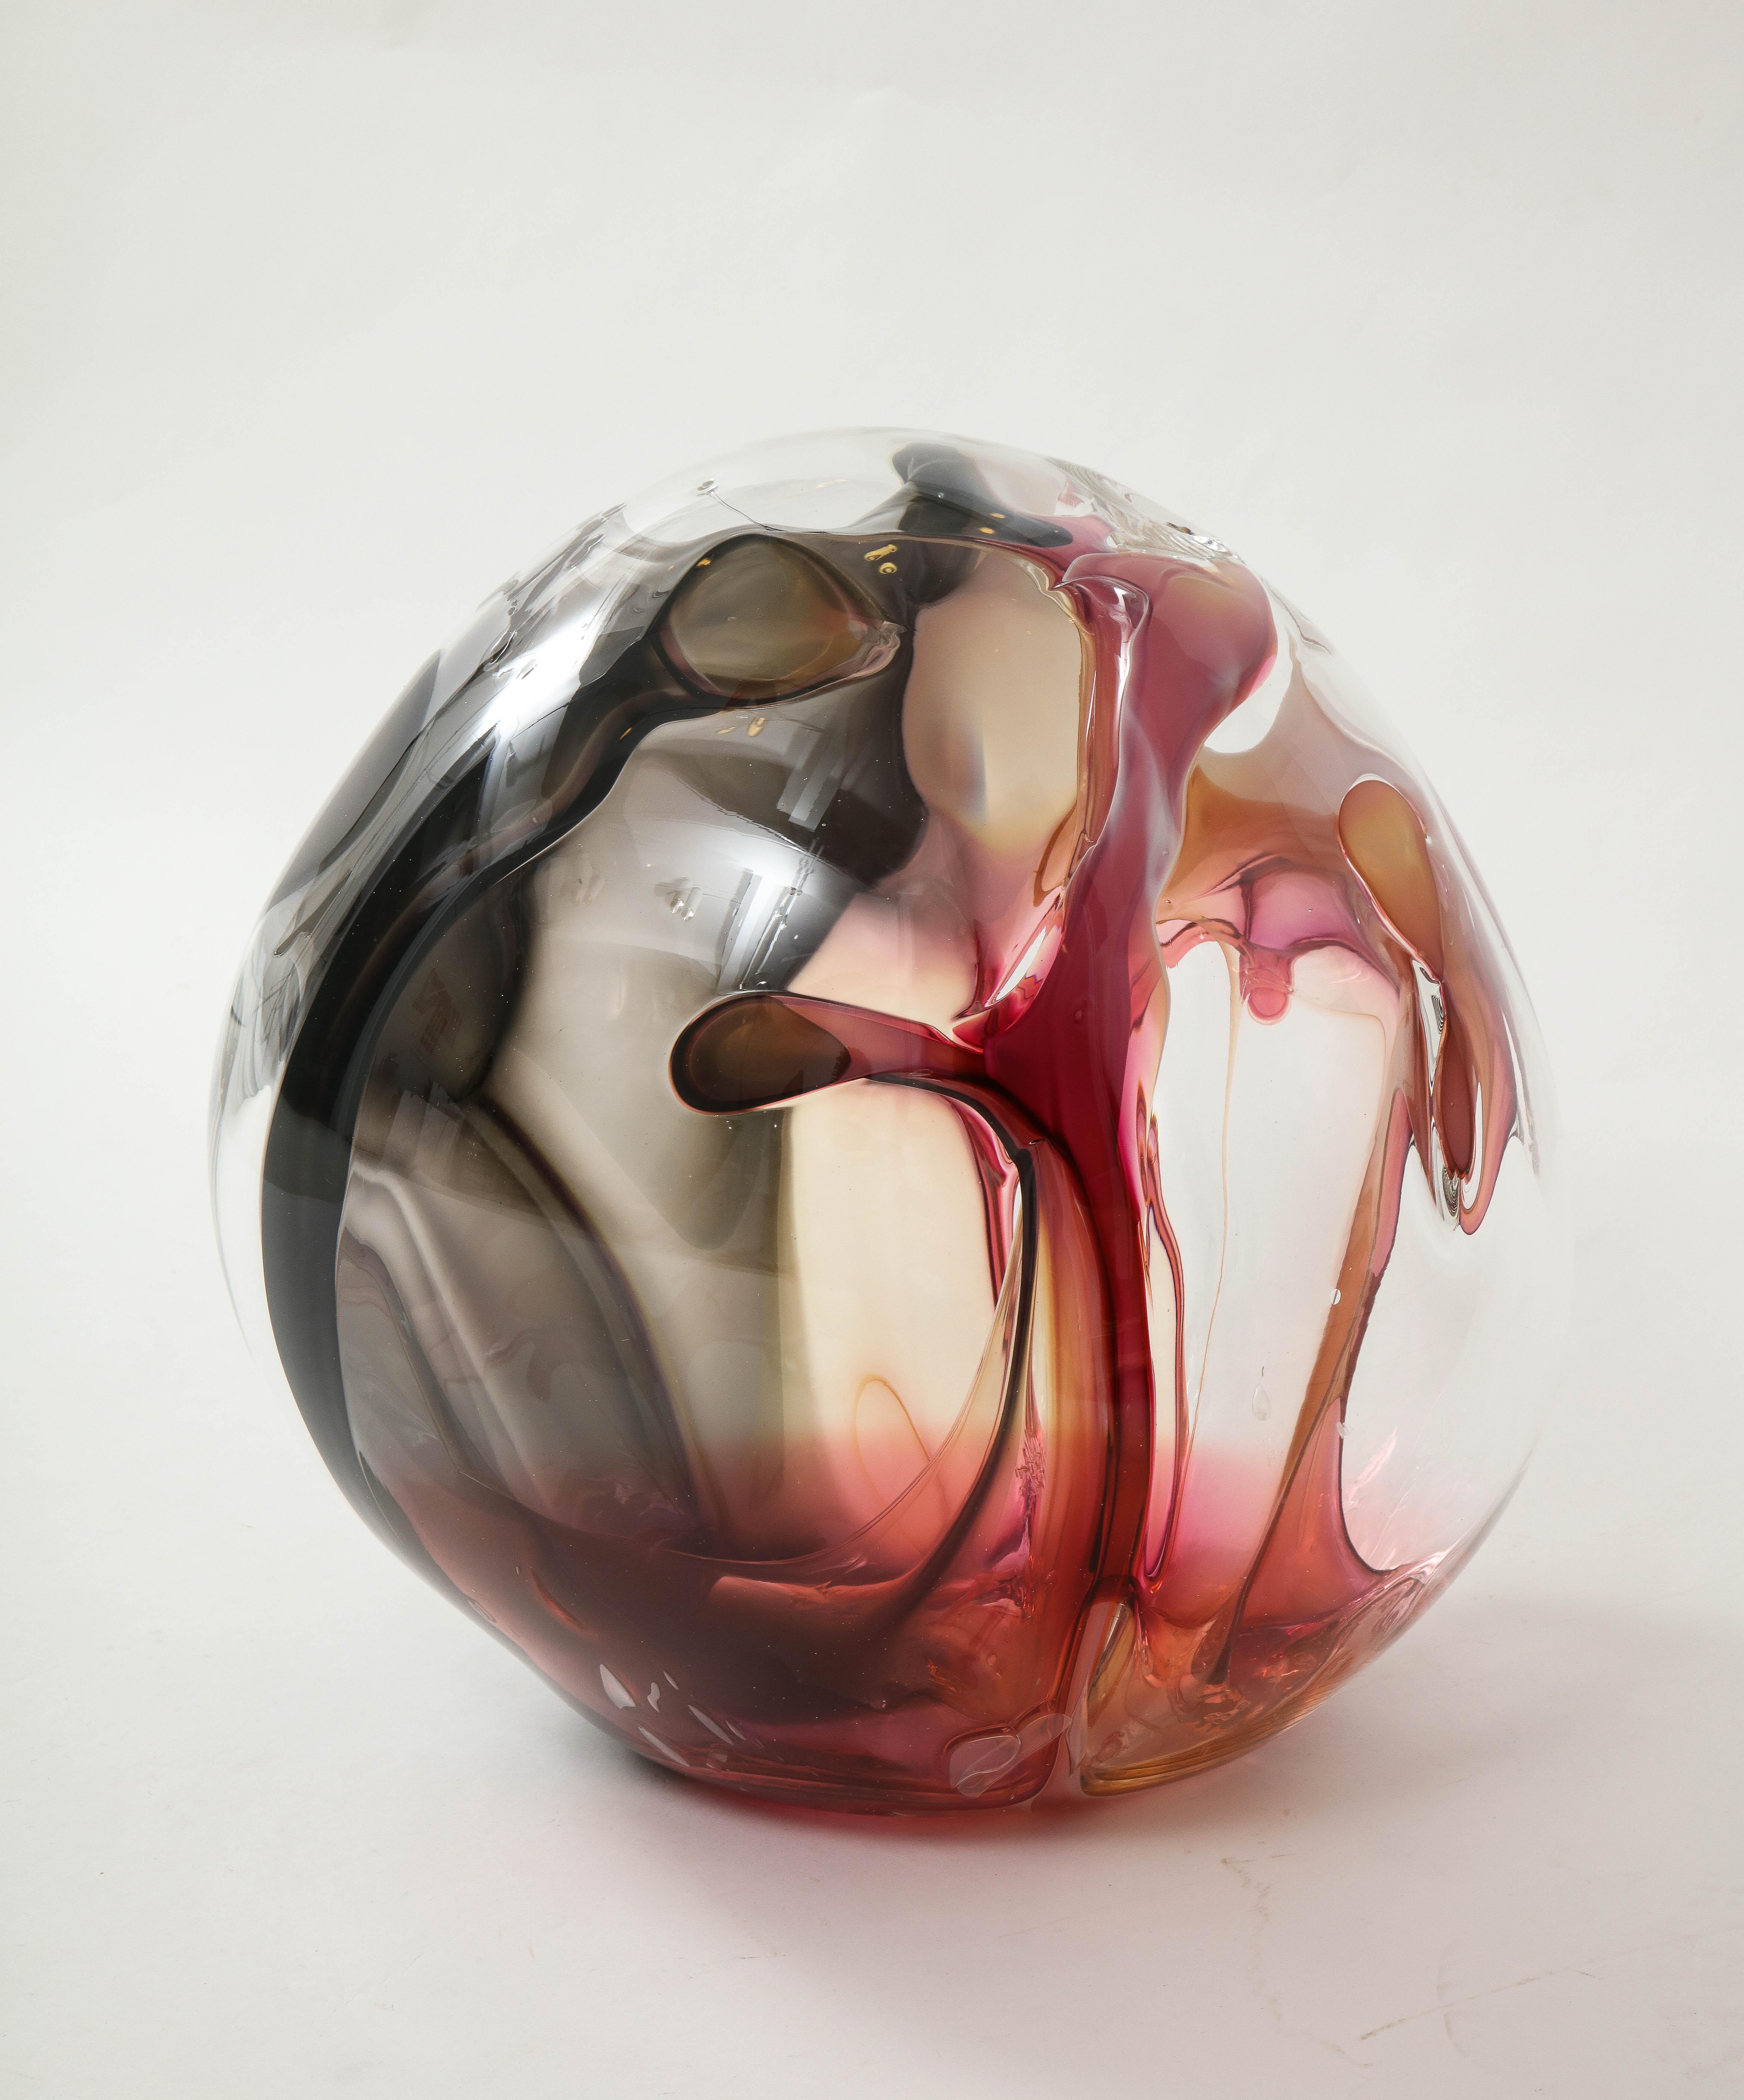 Extra large hand blown glass orb sculpture with internal glass threads of
Magenta, white, dark red, grey and black.
Signed and dated on the bottom by Peter Bramhall.